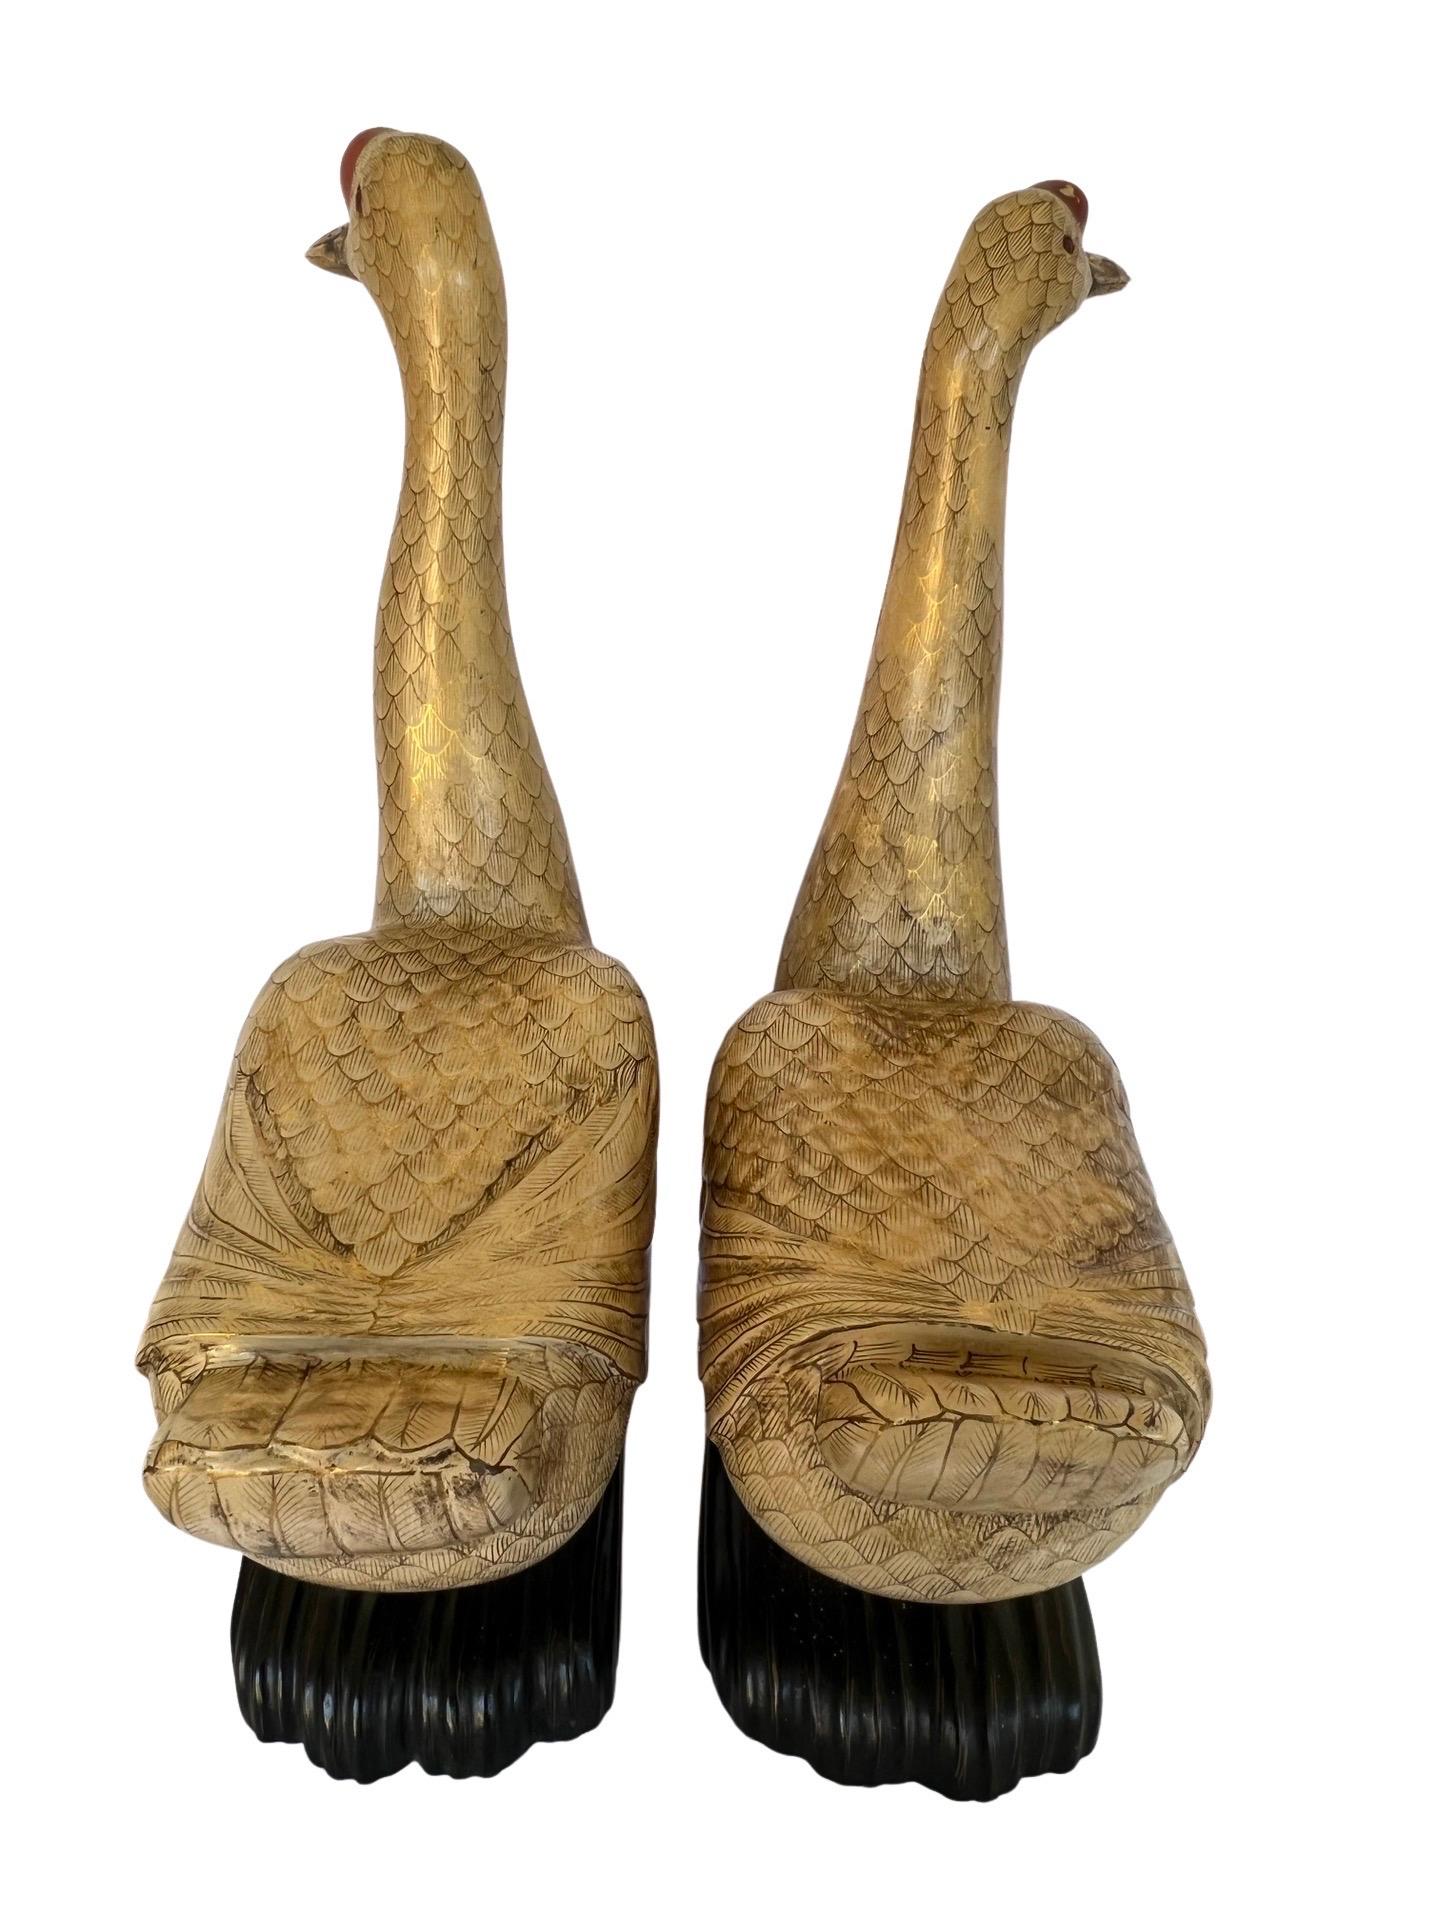 Pair, 19th Century Chinese Export Carved Wood & Gilt Lacquered Geese Statues 1